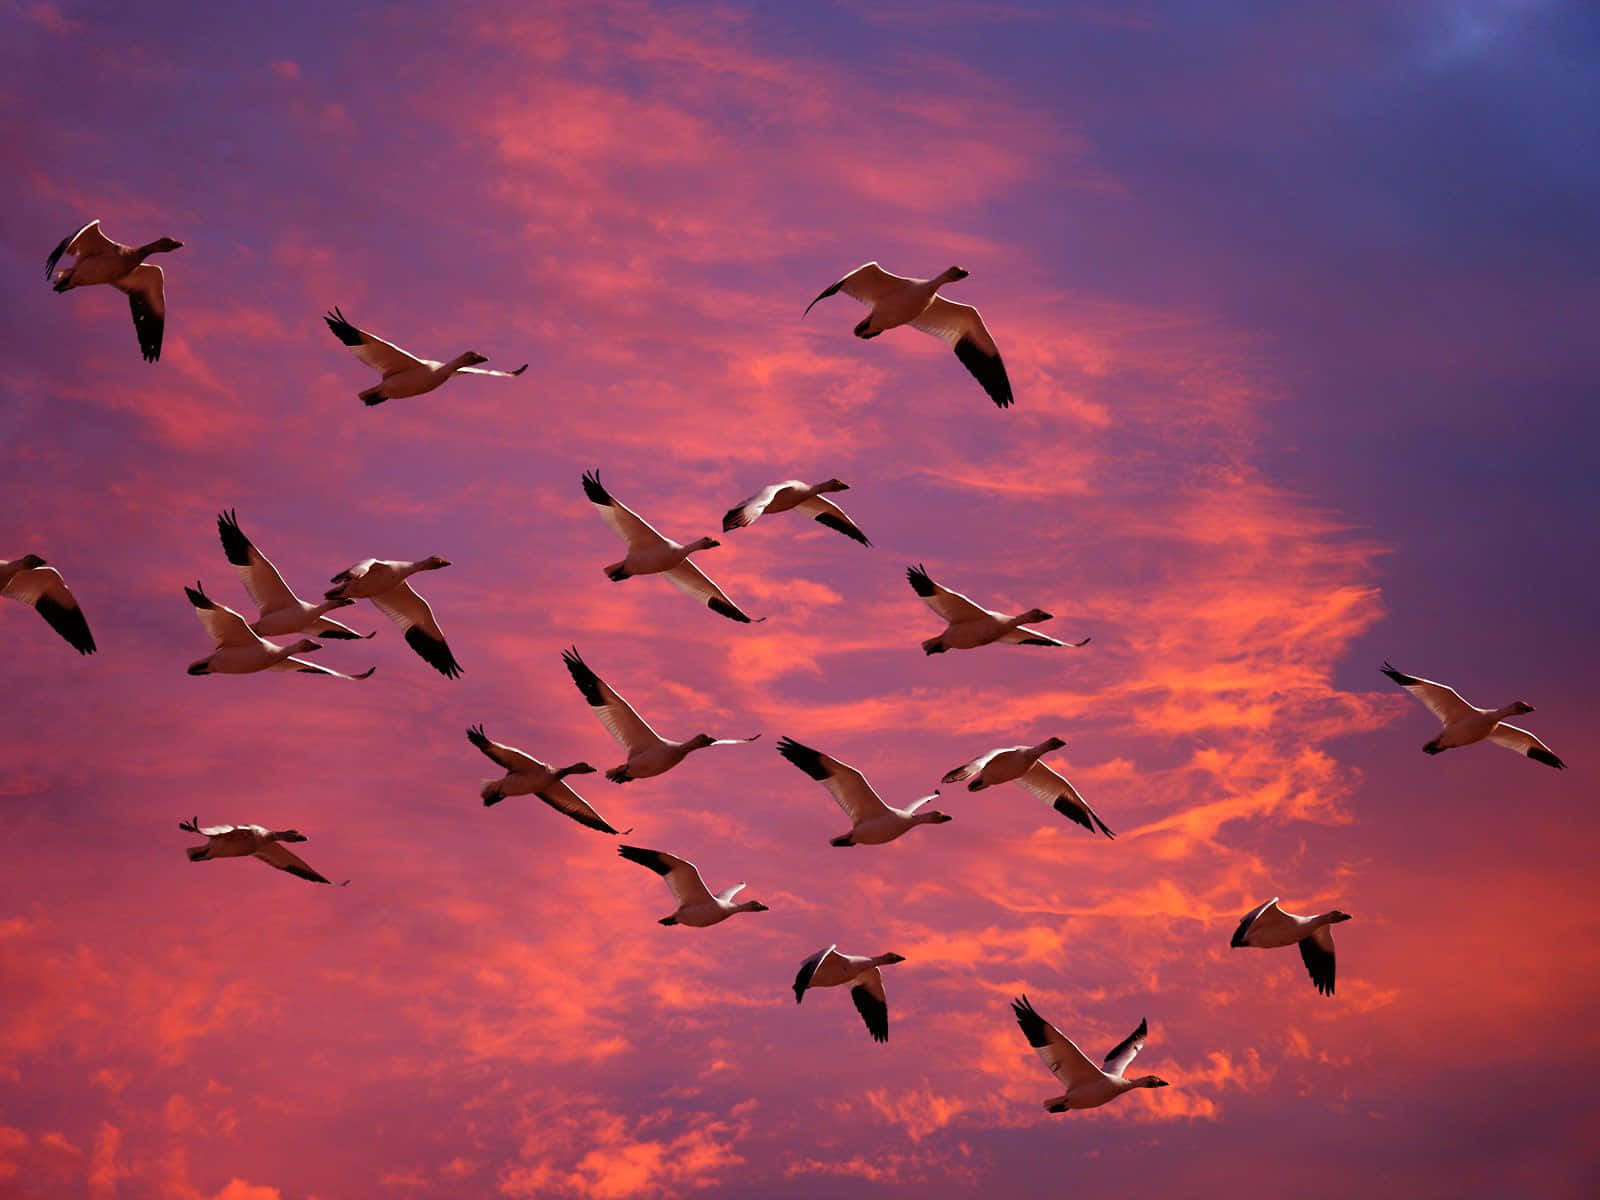 Free Birds Flying Wallpaper Downloads, [100+] Birds Flying Wallpapers for  FREE 